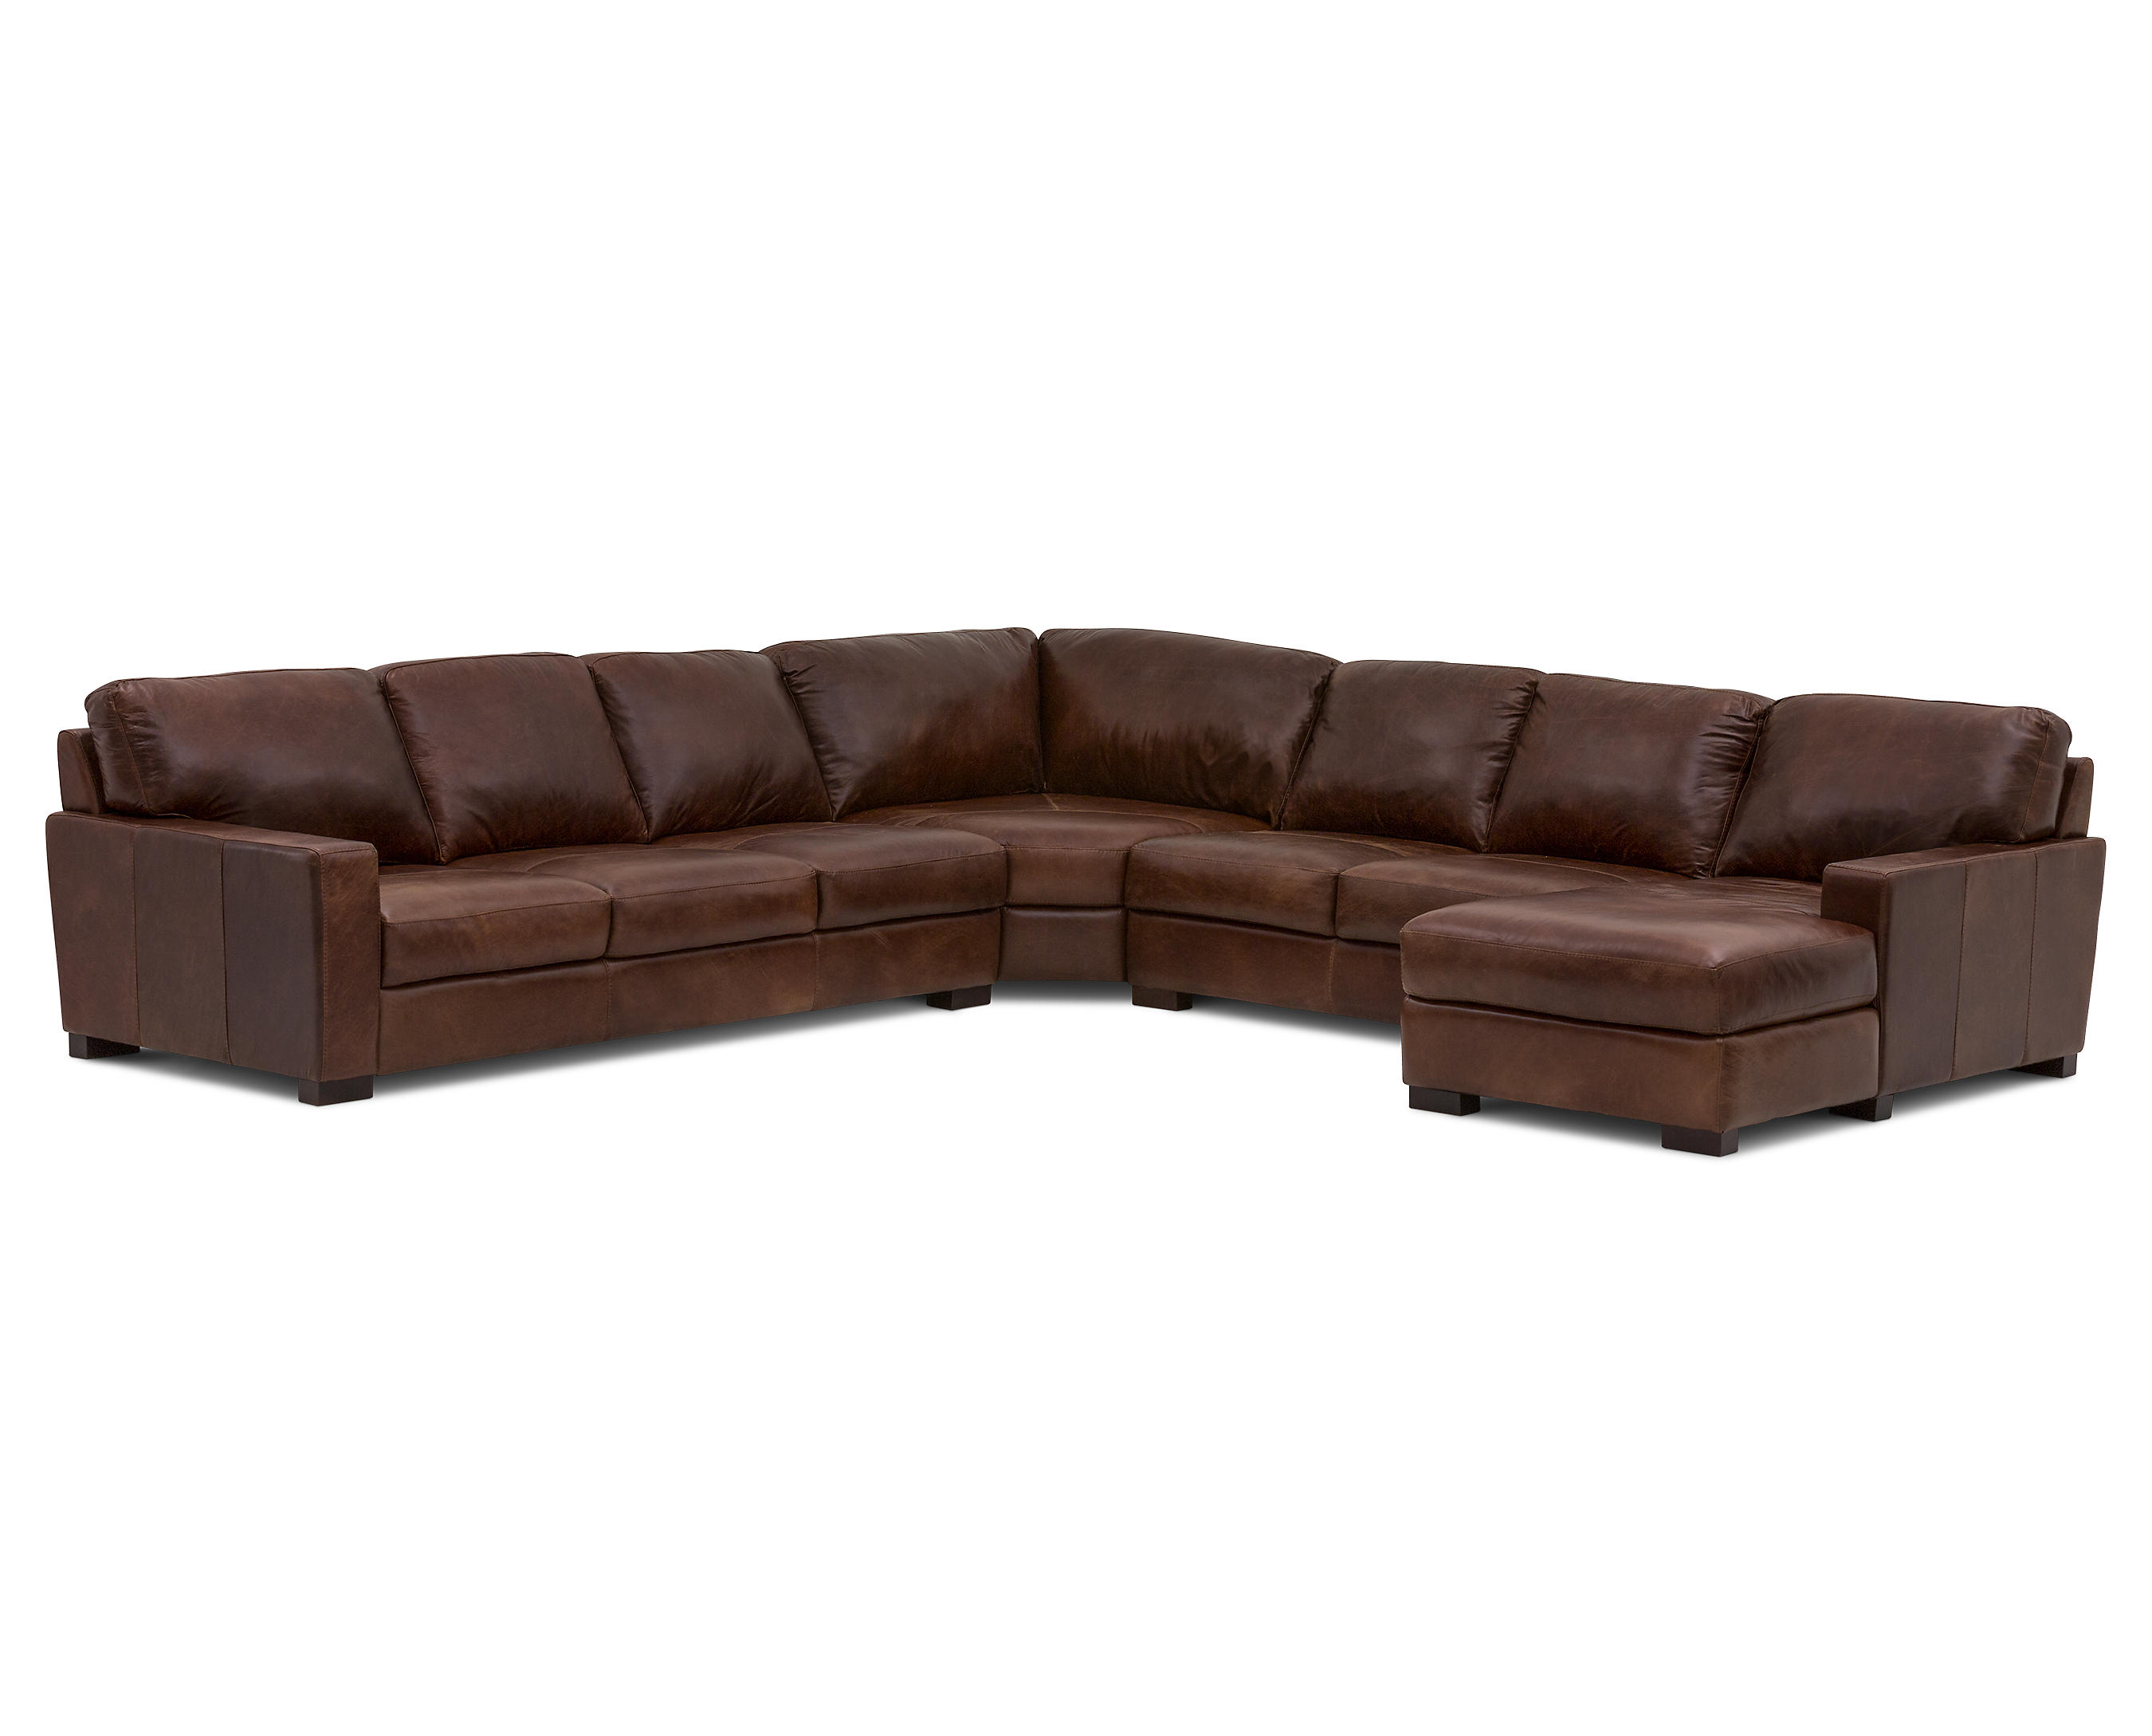 Durango 4 Pc Chaise Sectional, Leather Sectional Sofa Denver